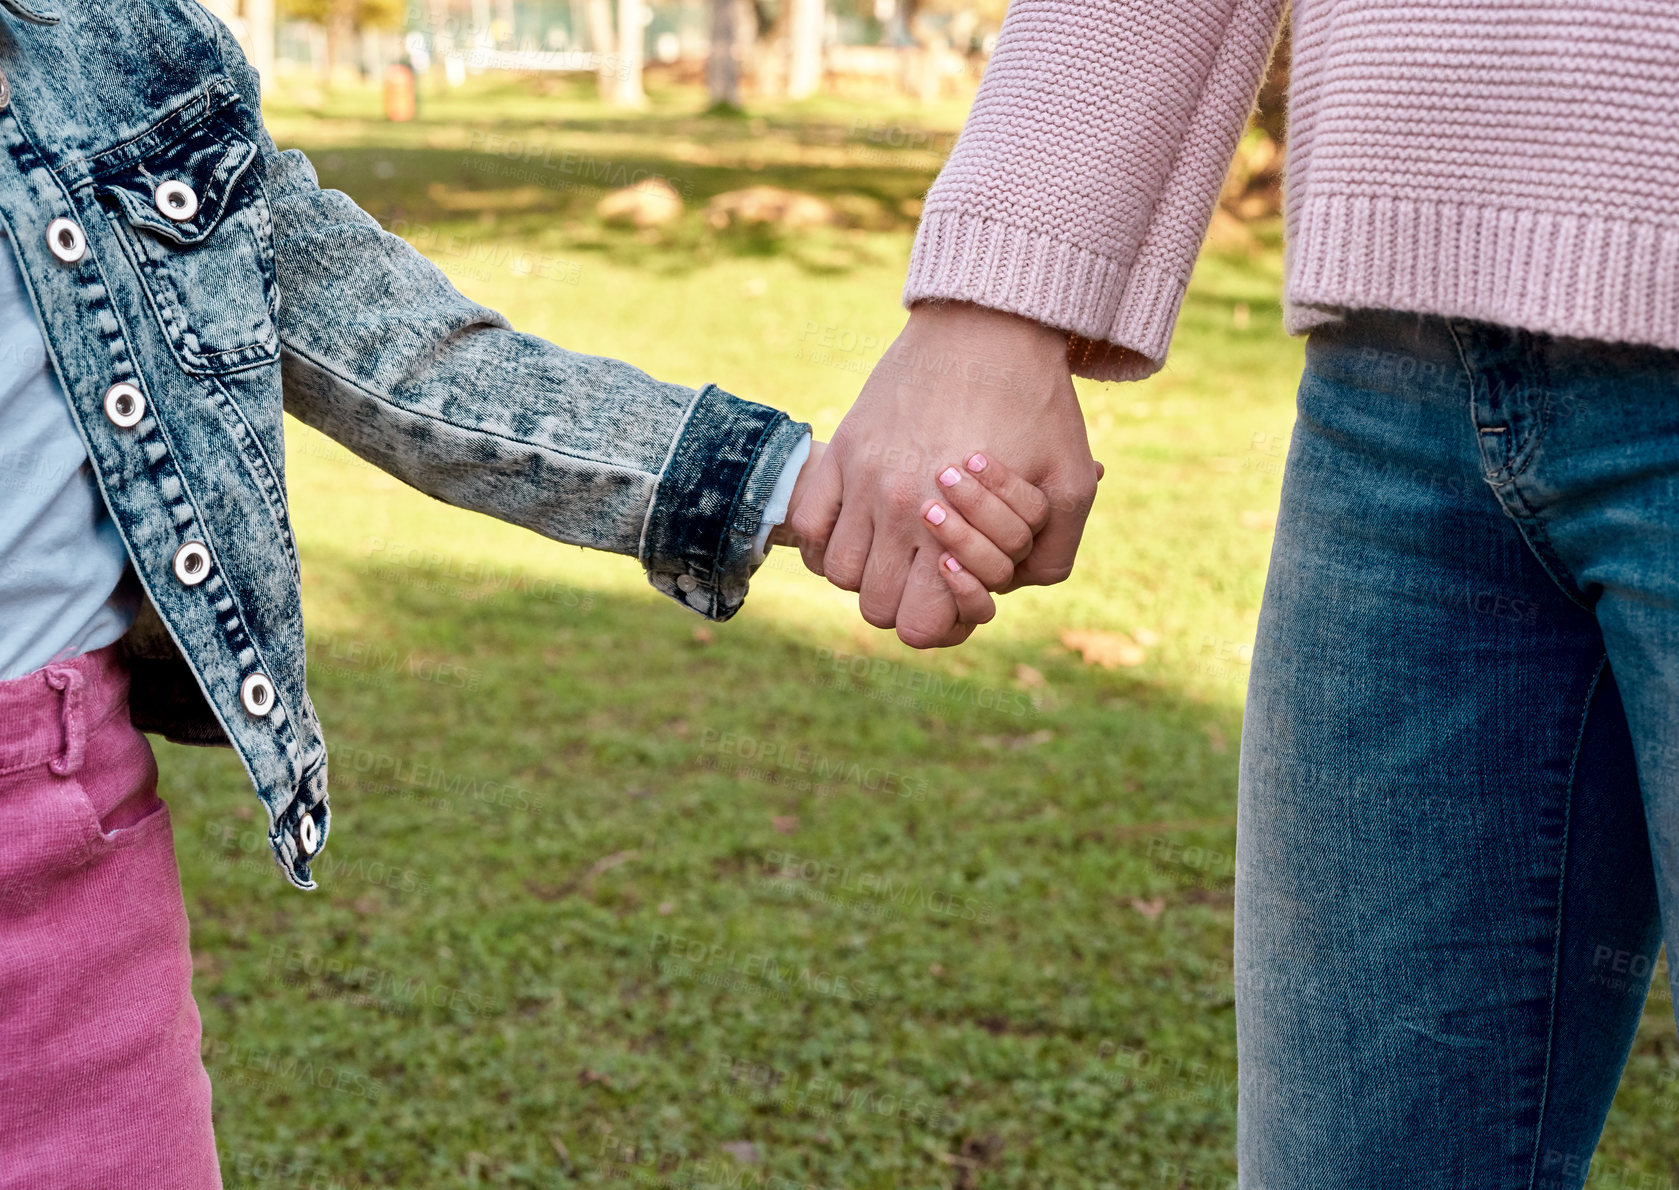 Buy stock photo Cropped shot of a little girl holding her mother’s hand while going for a walk in the park